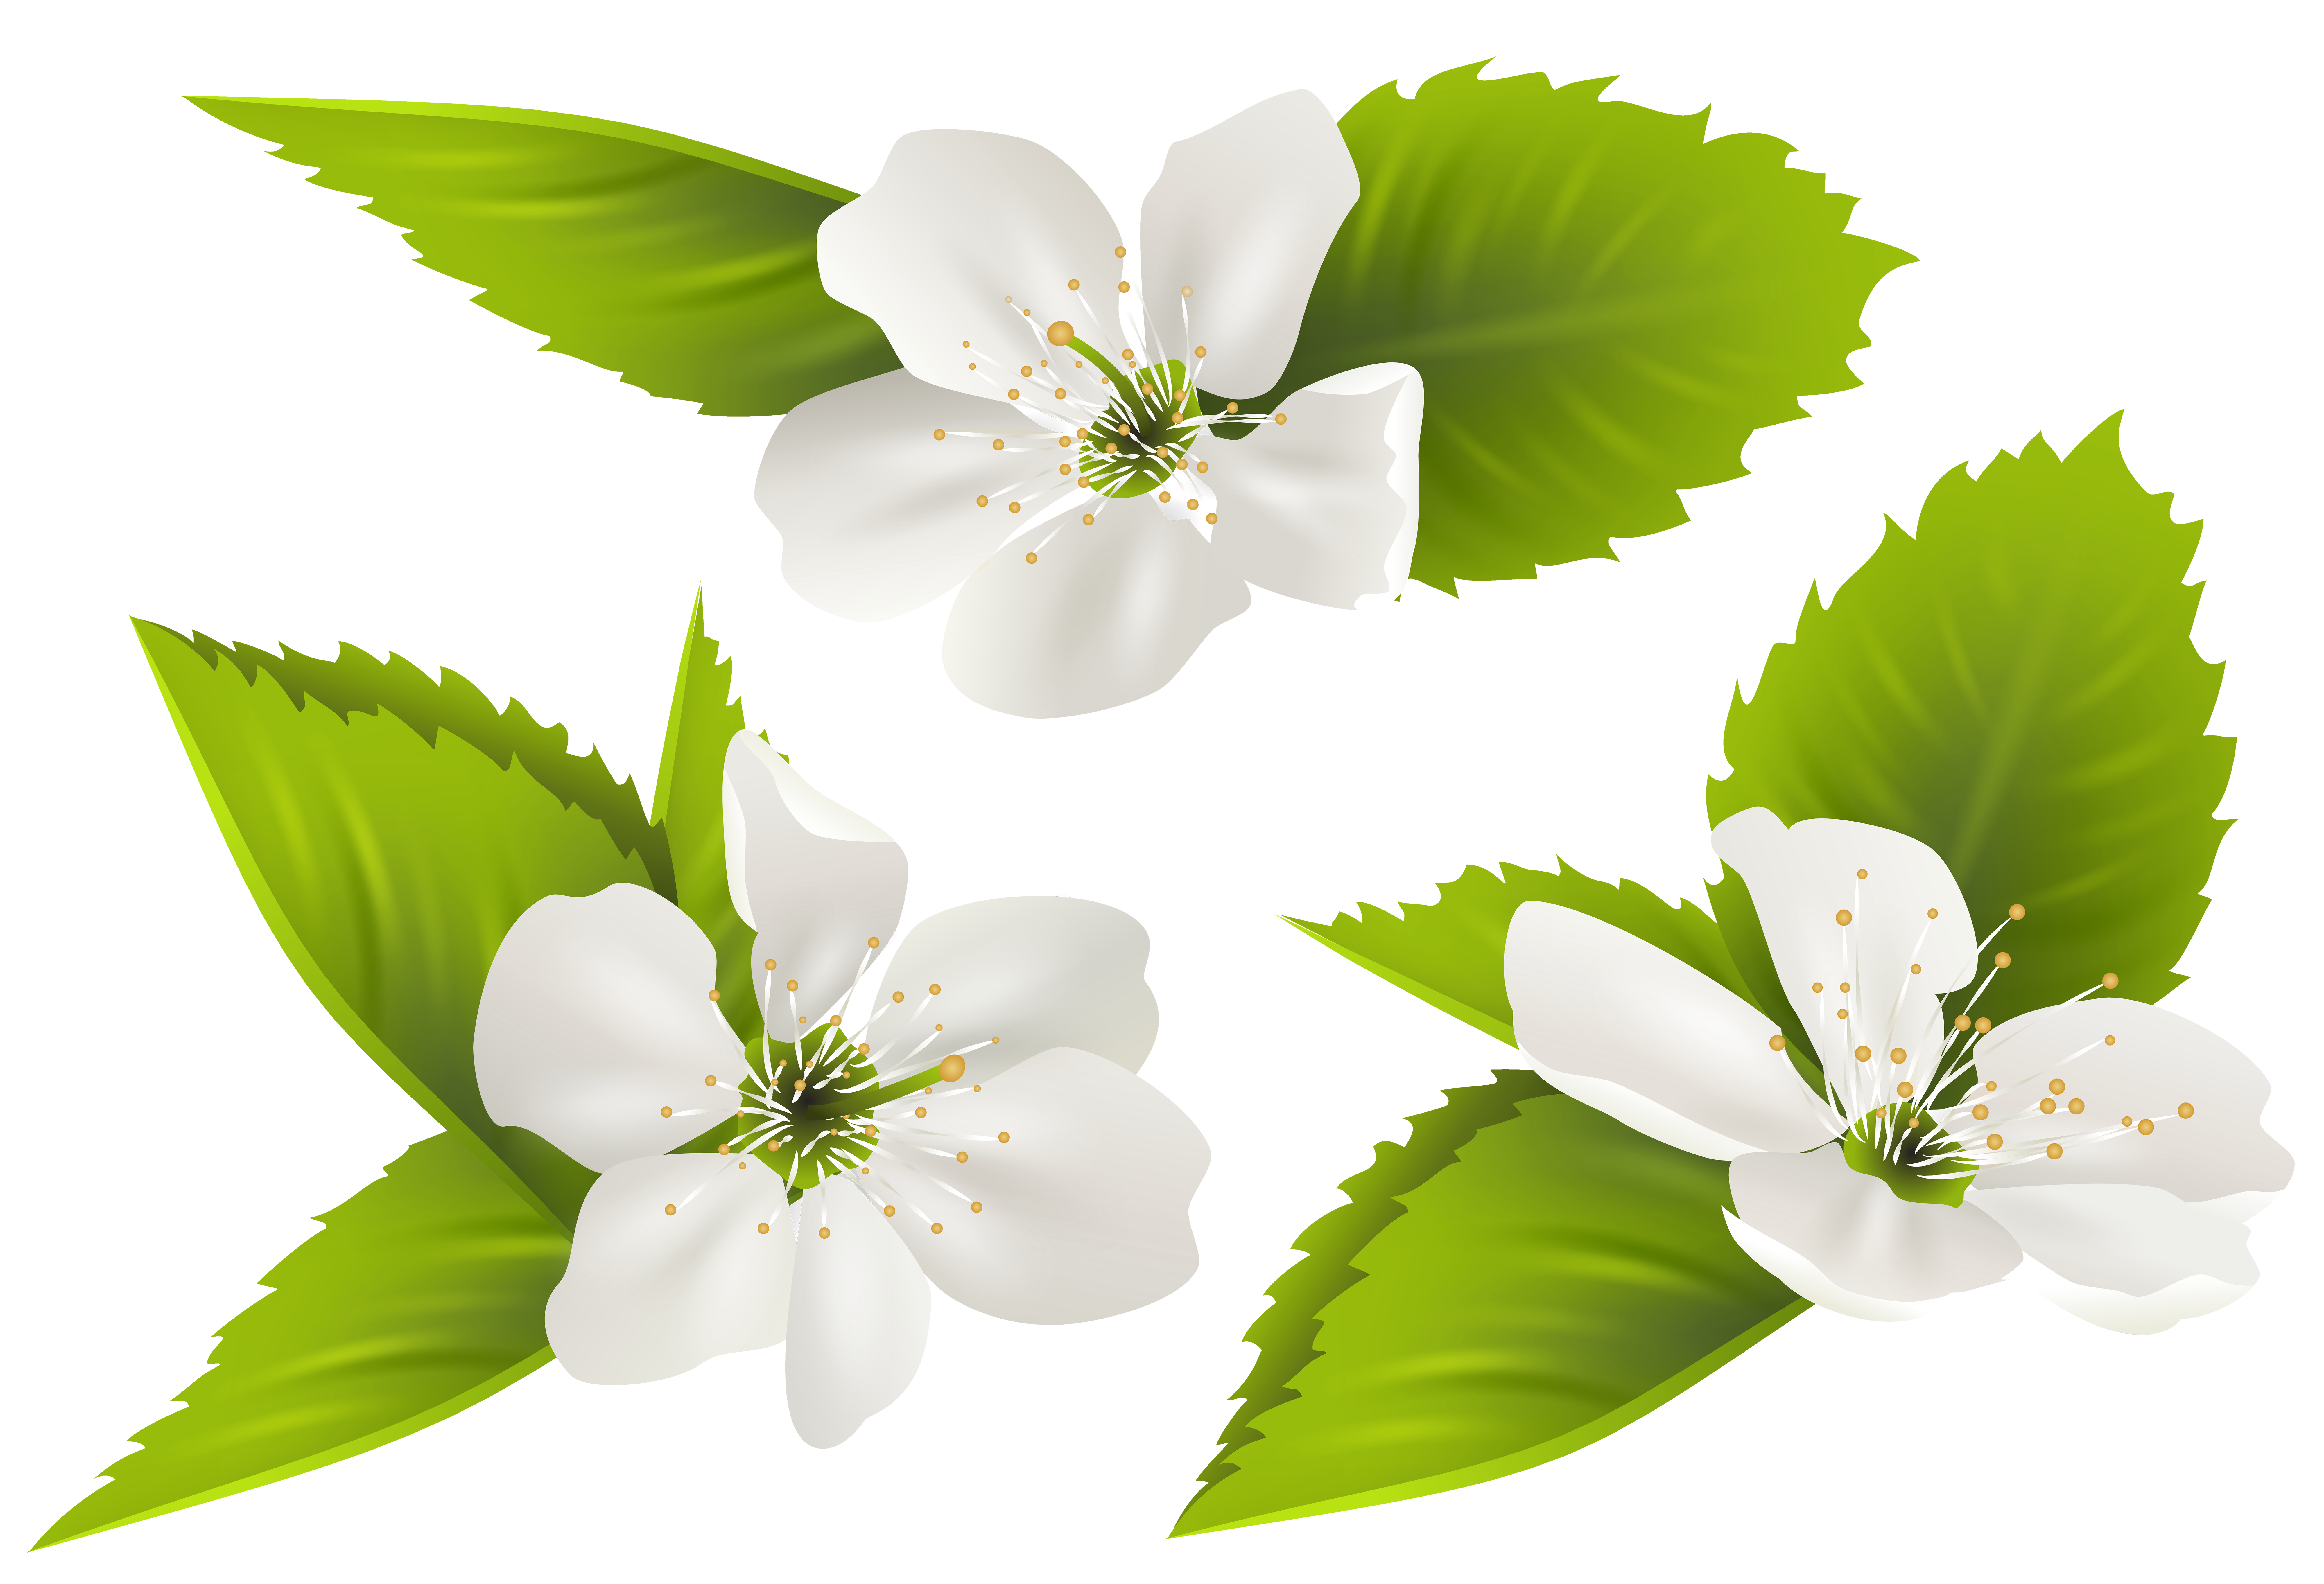 Spring Flowers Background​  Gallery Yopriceville - High-Quality Free Images  and Transparent PNG Clipart